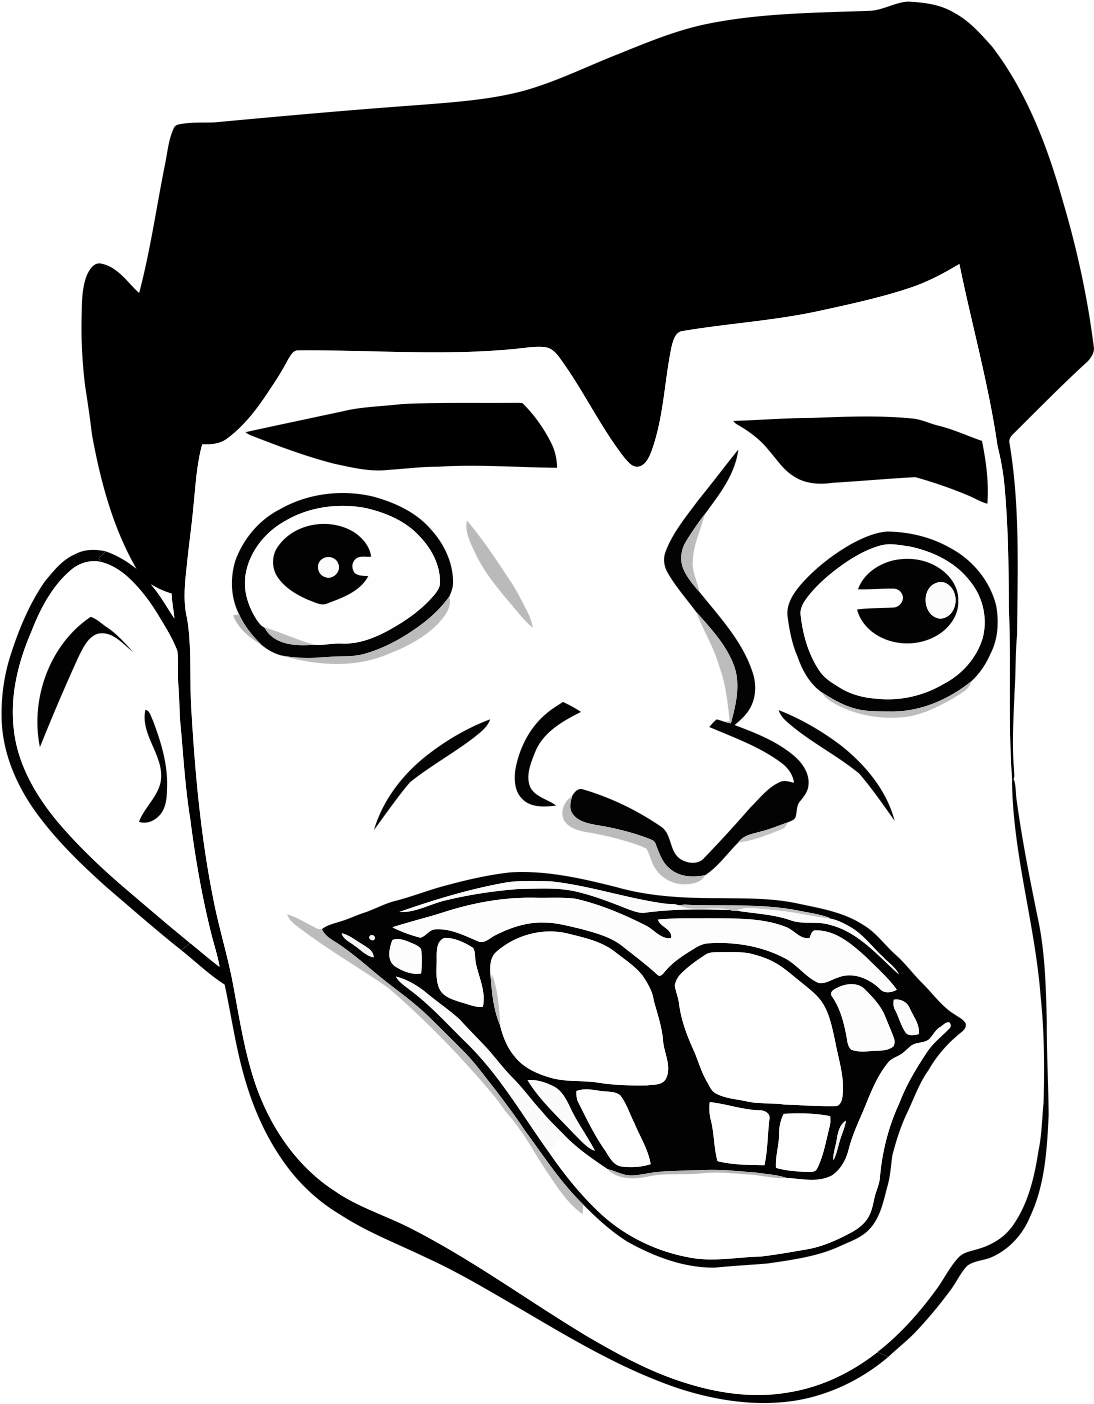 happy rage face png